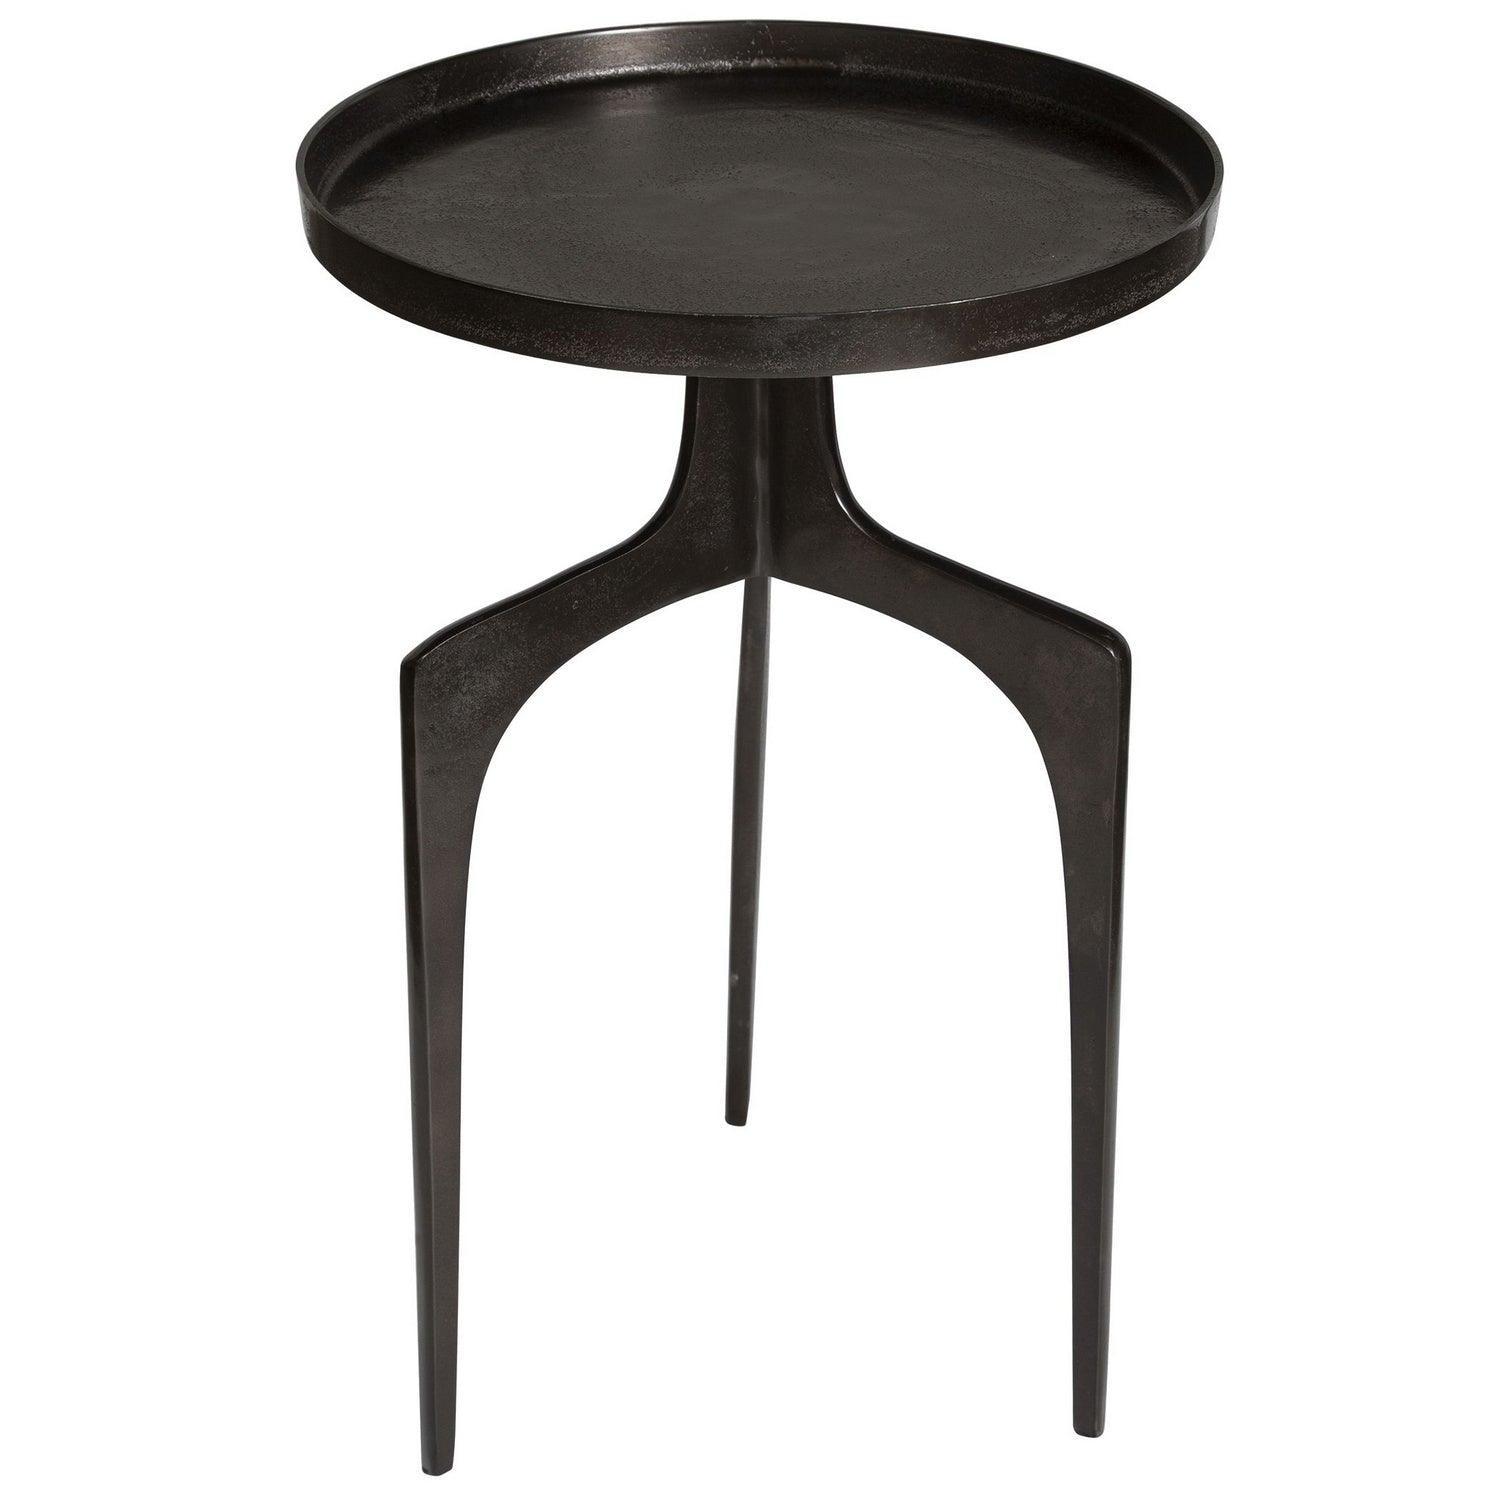 The Uttermost - Kenna Accent Table - 25141 | Montreal Lighting & Hardware